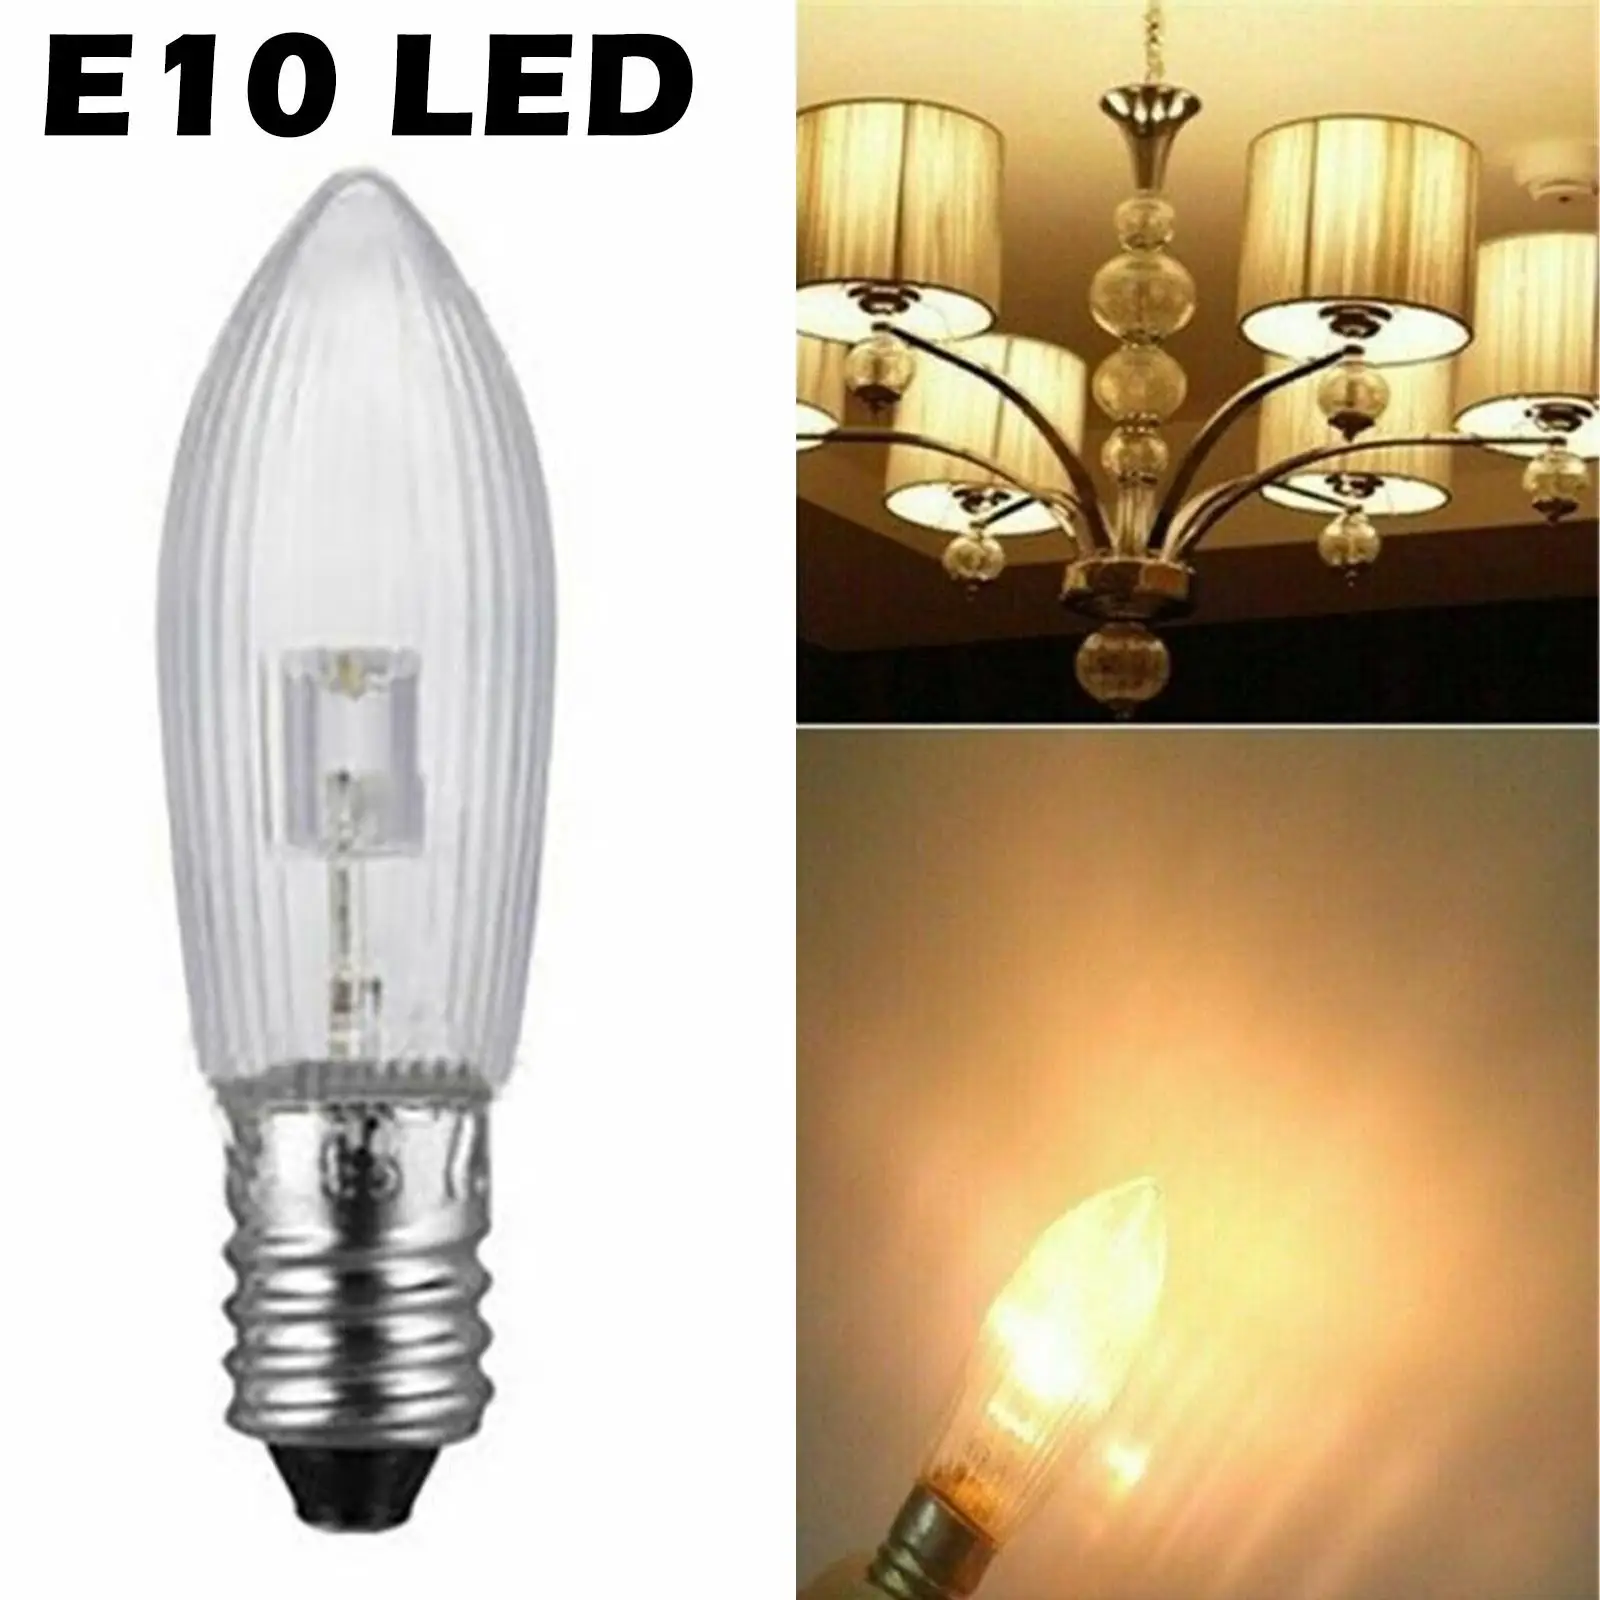 1pc E10 LED Bulbs Light Replacement Lamp Bulbs 10V-55V AC Bathroom Kitchen Home Lamps Bulb Decoration Lights For String Lig O5Q8 body bulbs funny man women body bulbs desk lamp personalized little glowing figures table light home decoration novelty creat